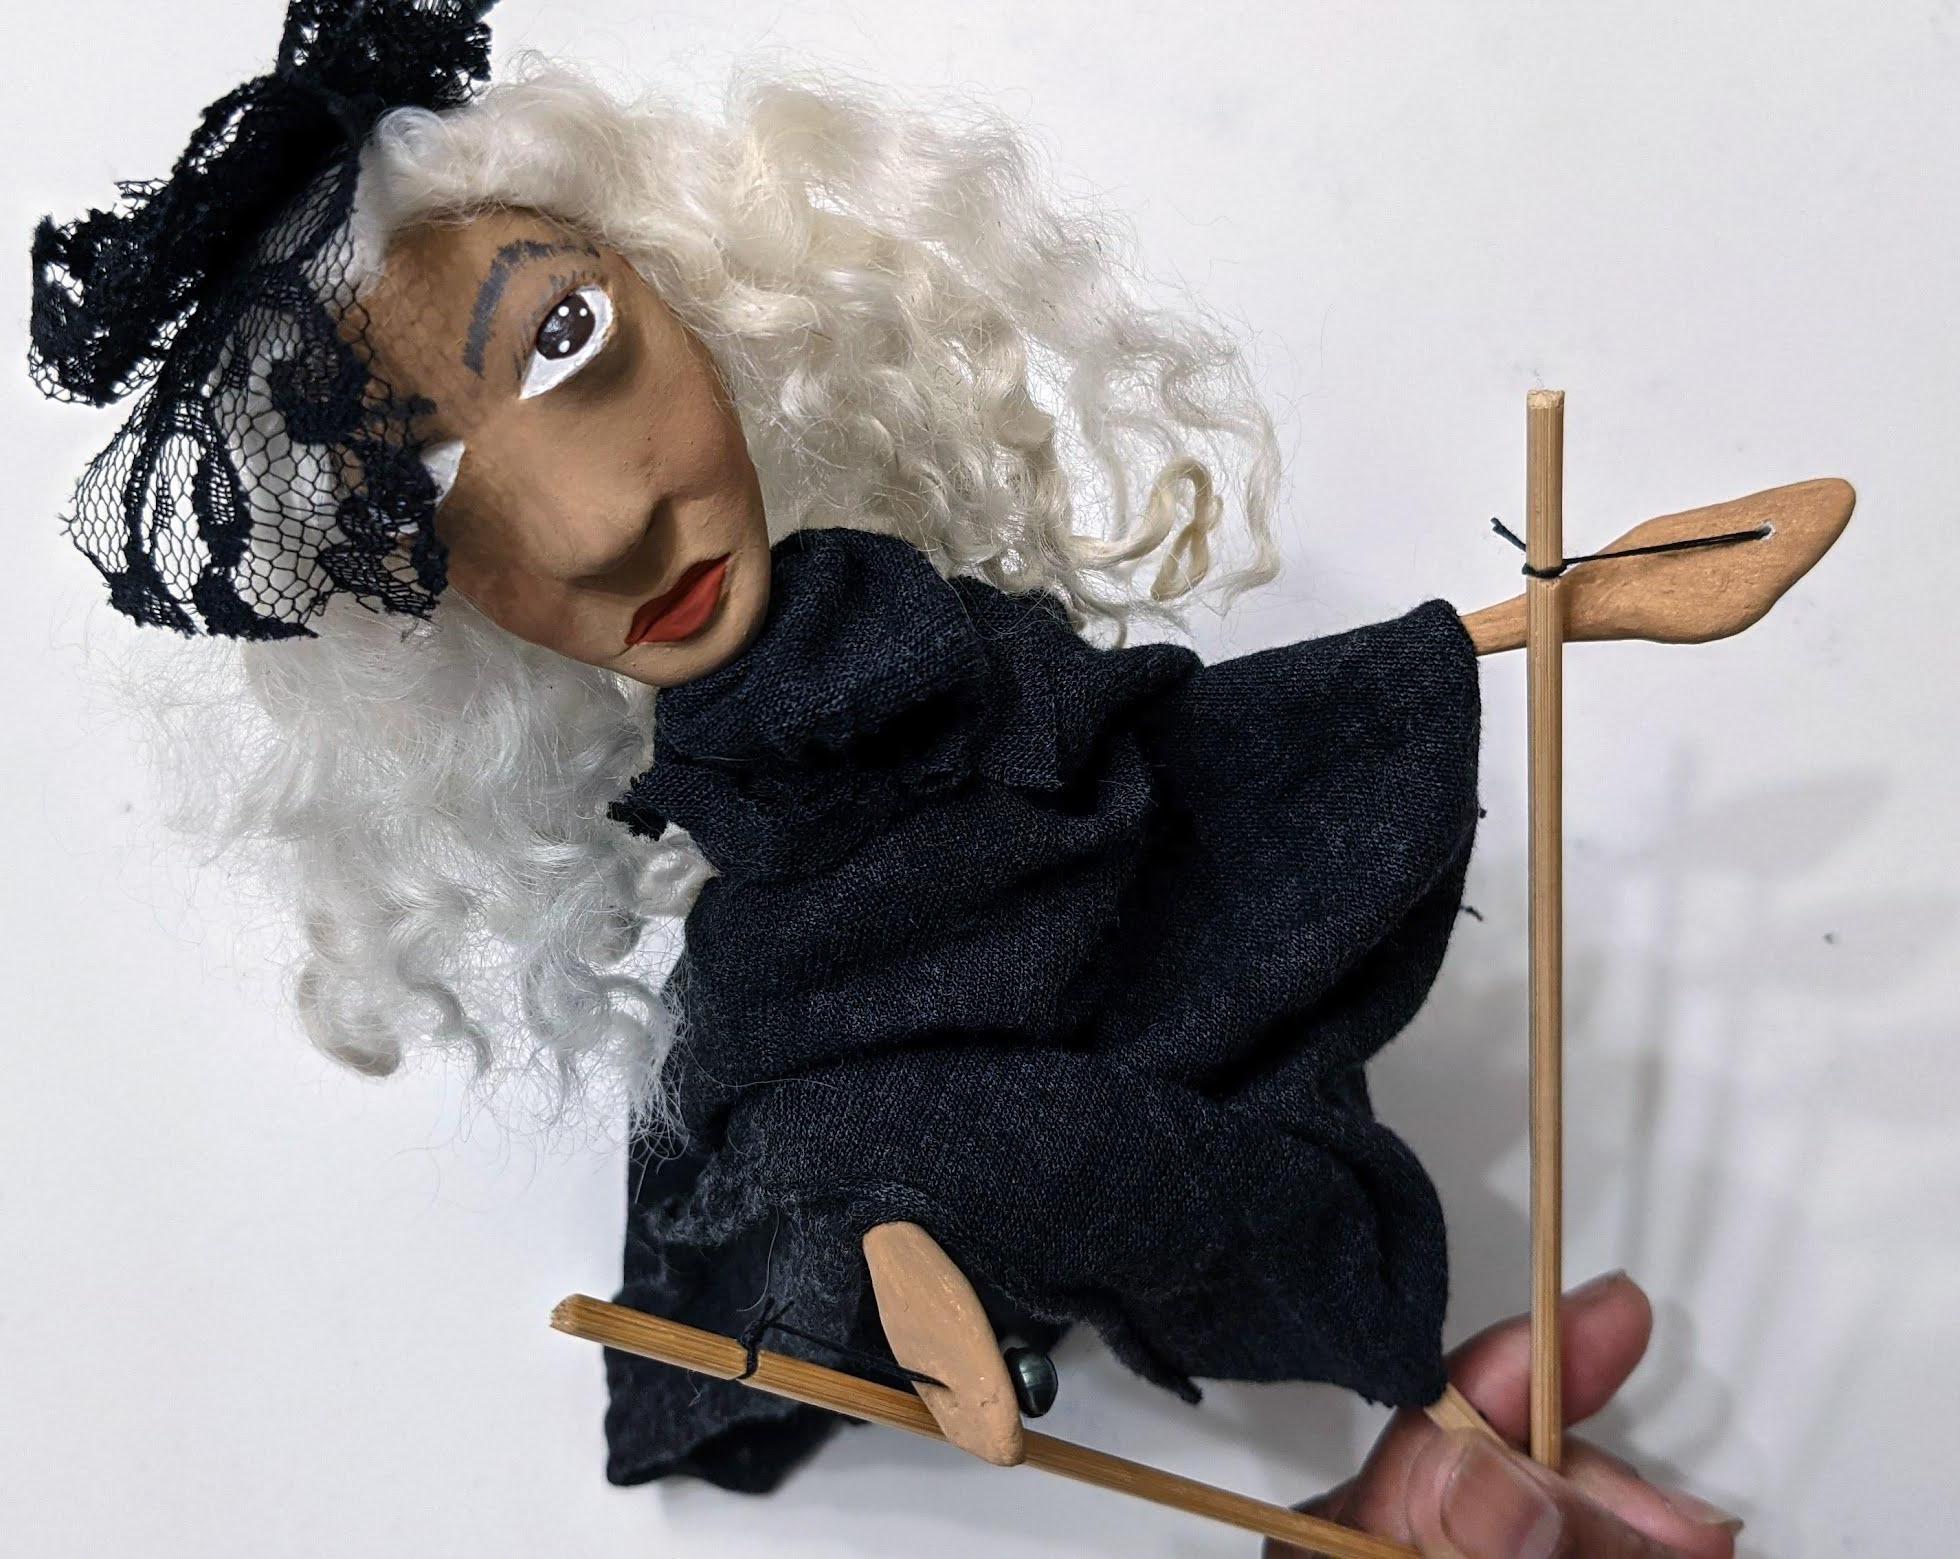 How to Create a Simple Stick Puppet